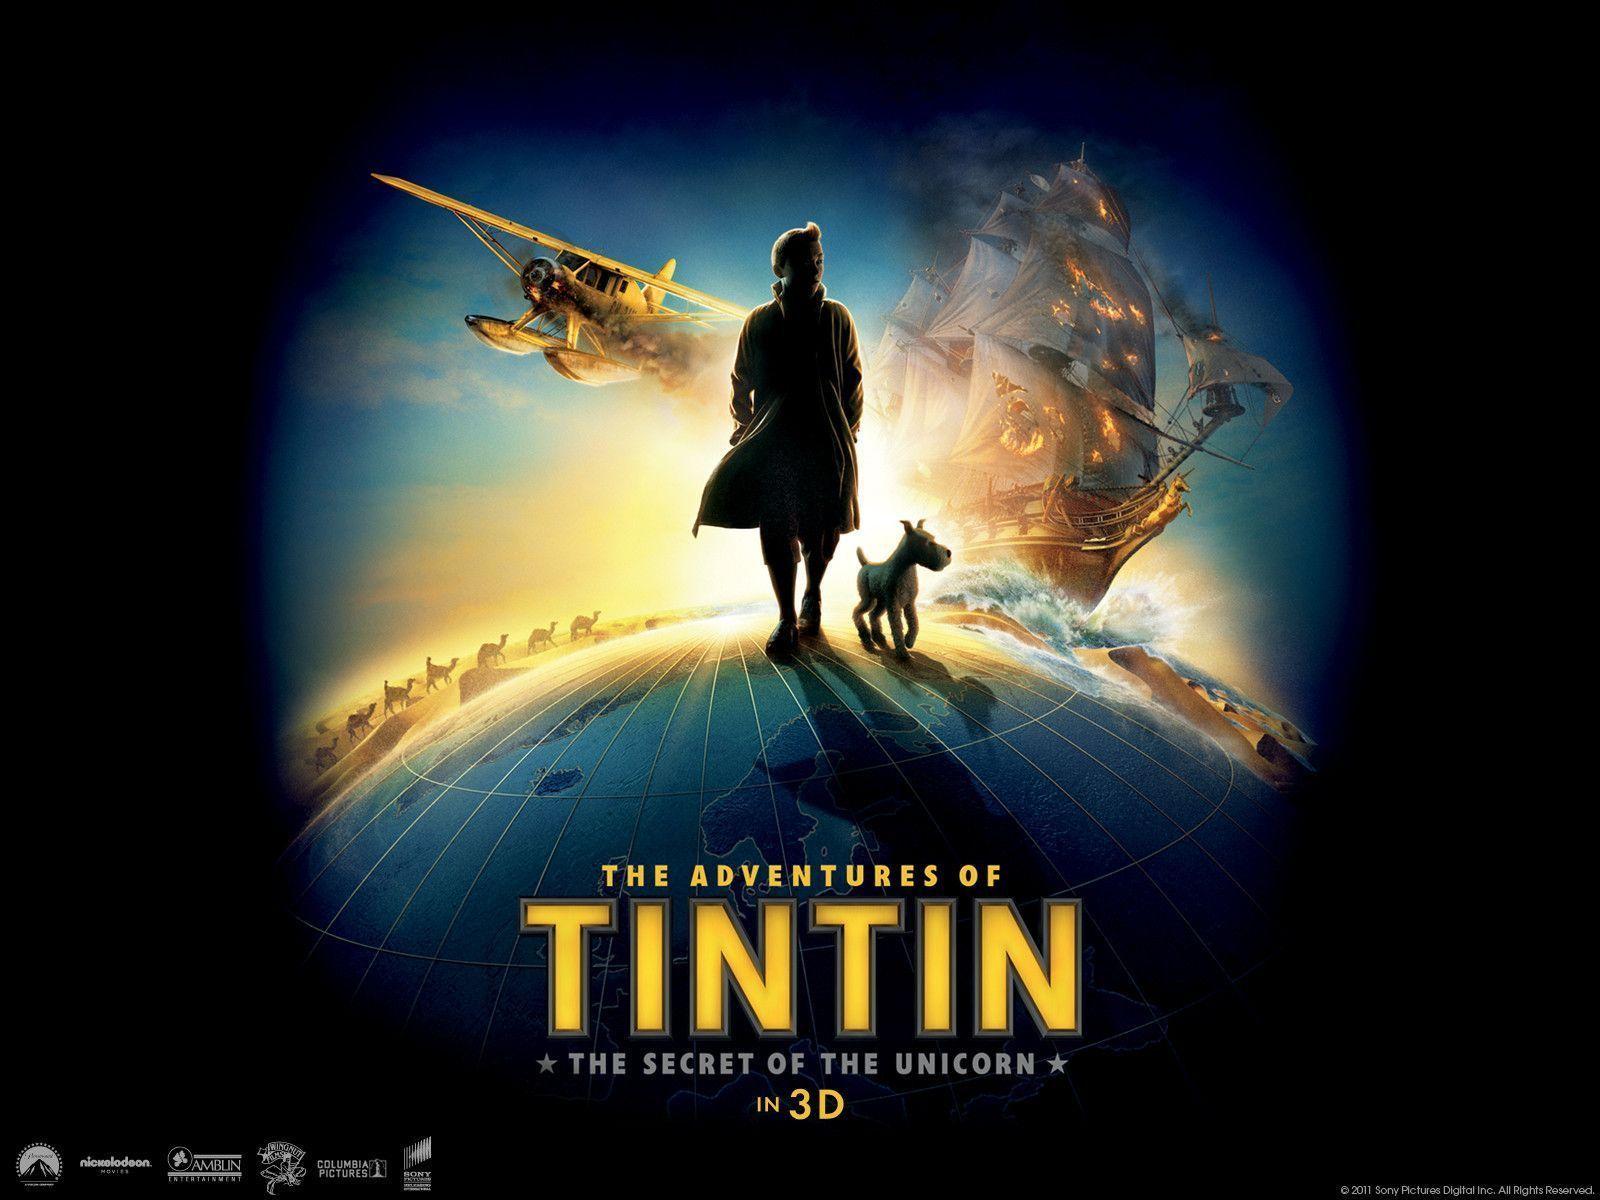 The Adventures of Tintin Posters HD Wallpaper HD Wallpaper